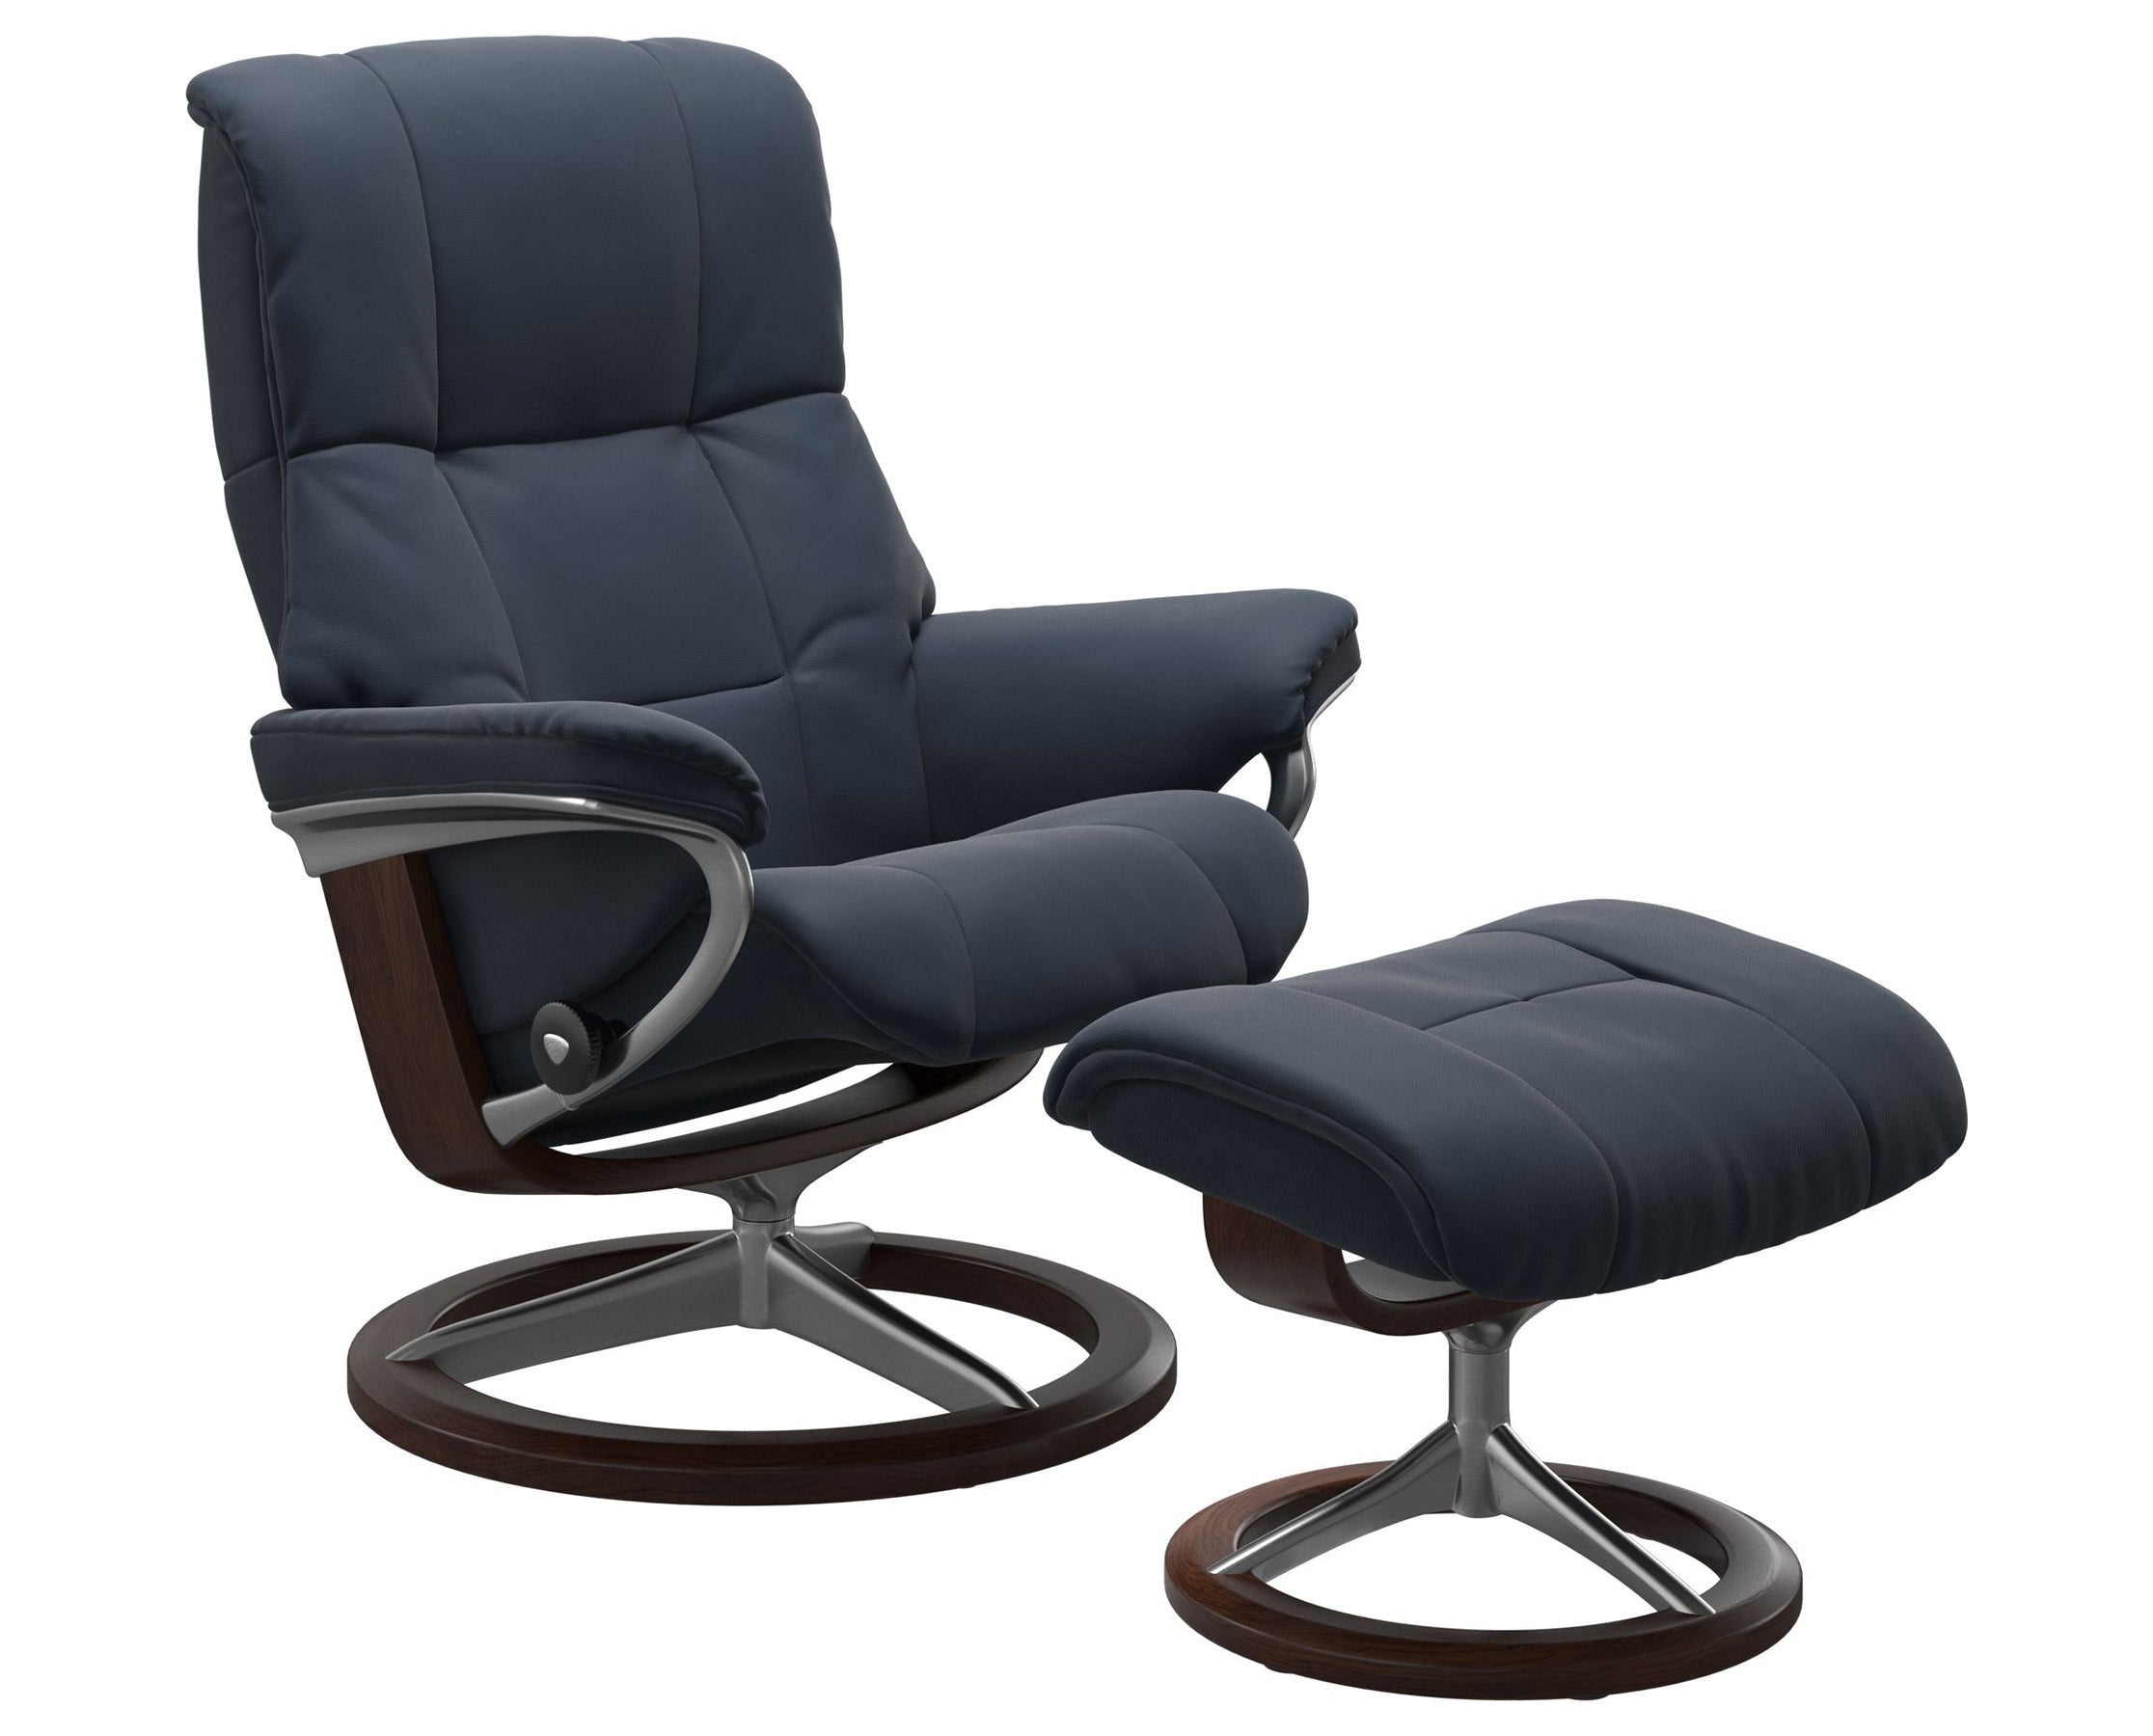 Paloma Leather Oxford Blue S/M/L and Brown Base | Stressless Mayfair Signature Recliner | Valley Ridge Furniture